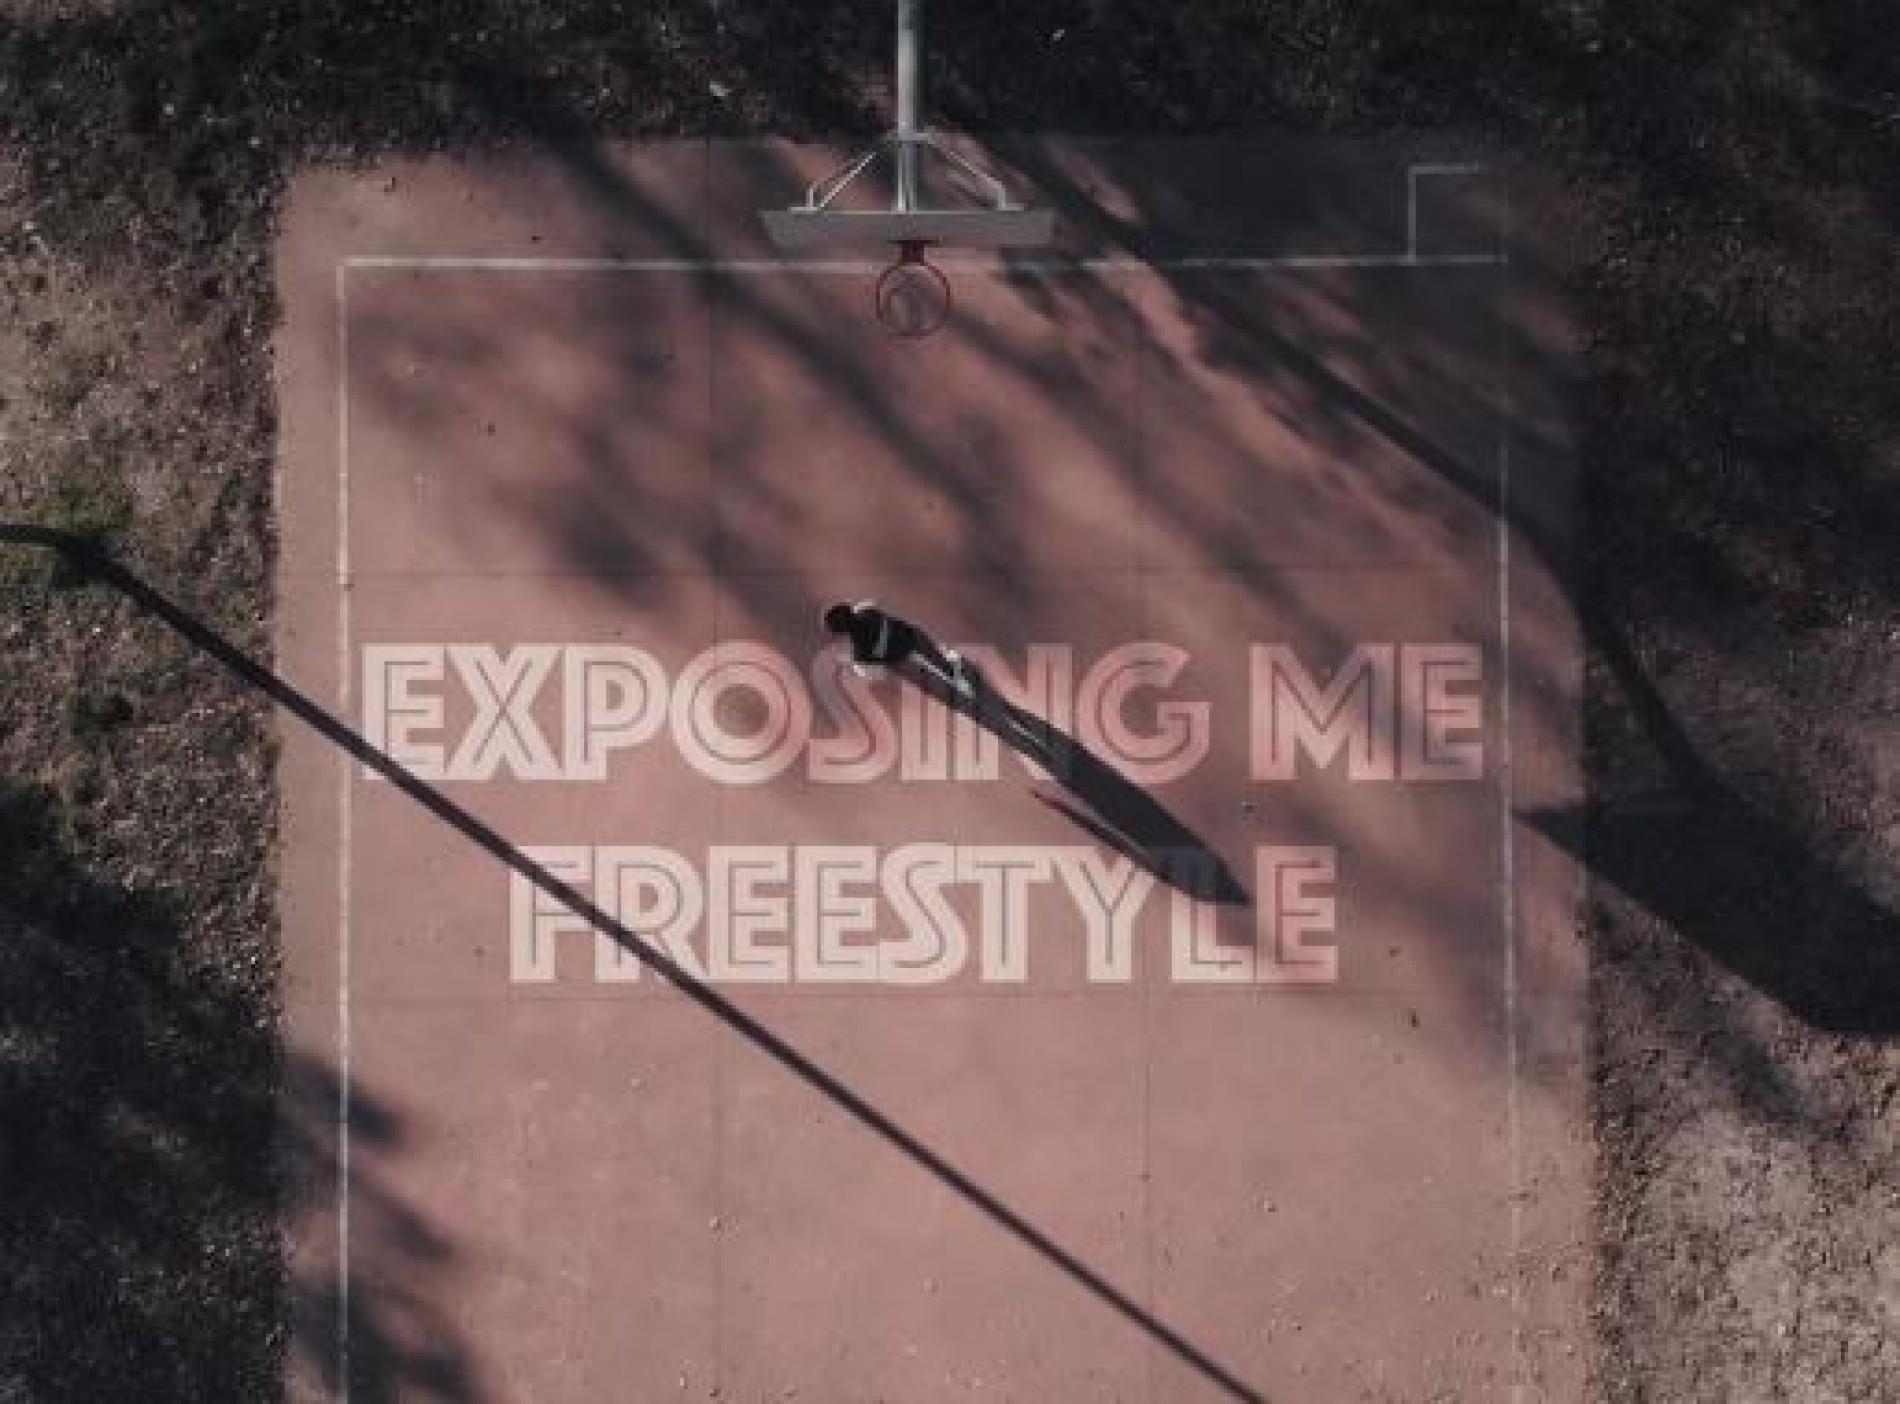 New Music : Kao$ – Exposing Me (Freestyle)